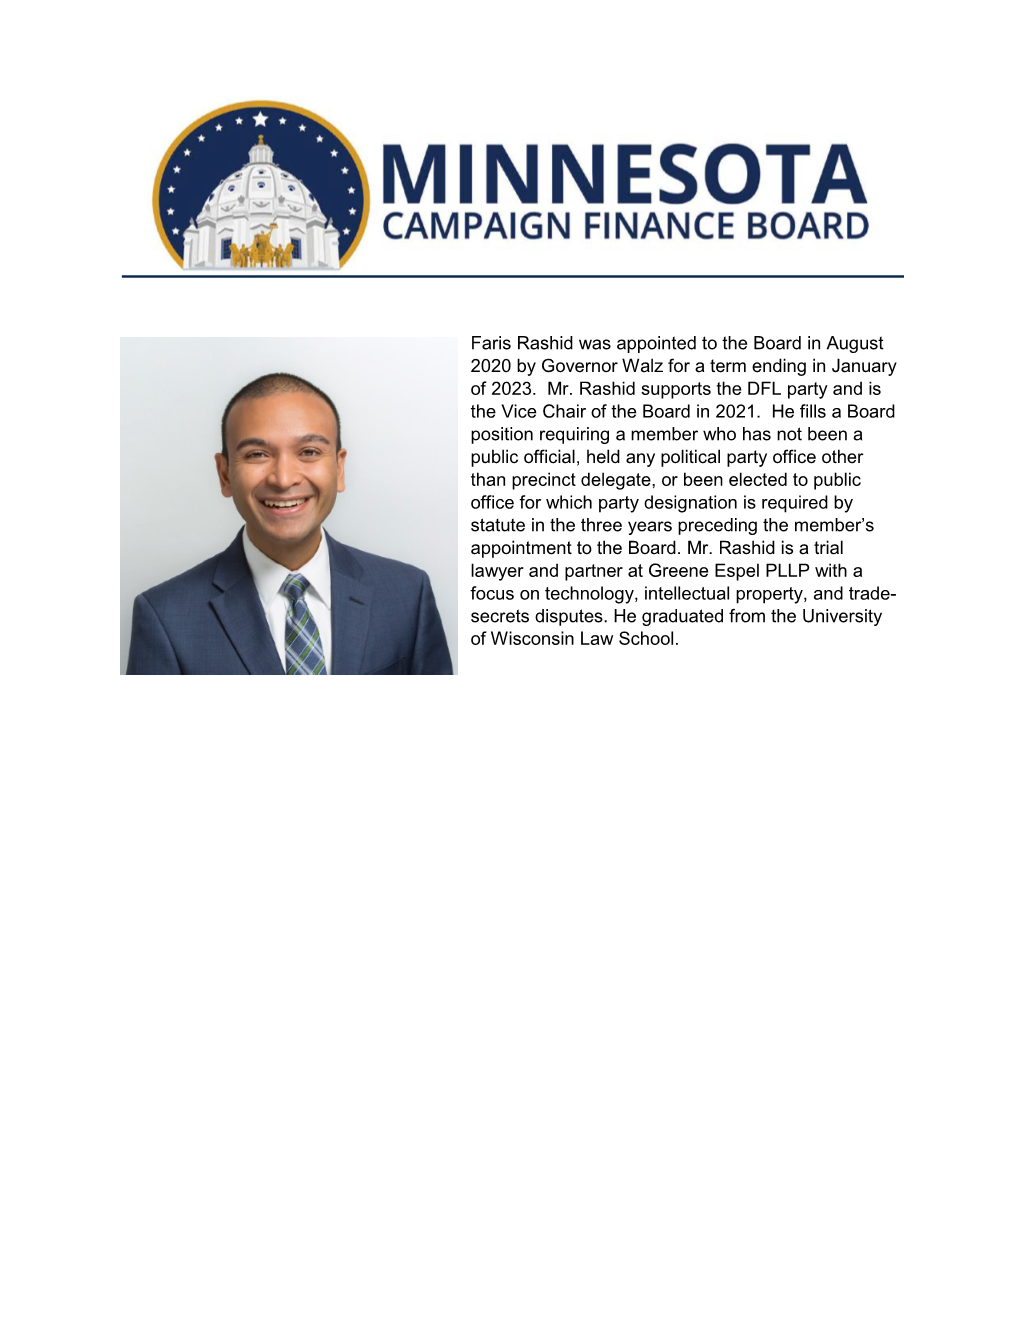 Faris Rashid Was Appointed to the Board in August 2020 by Governor Walz for a Term Ending in January of 2023